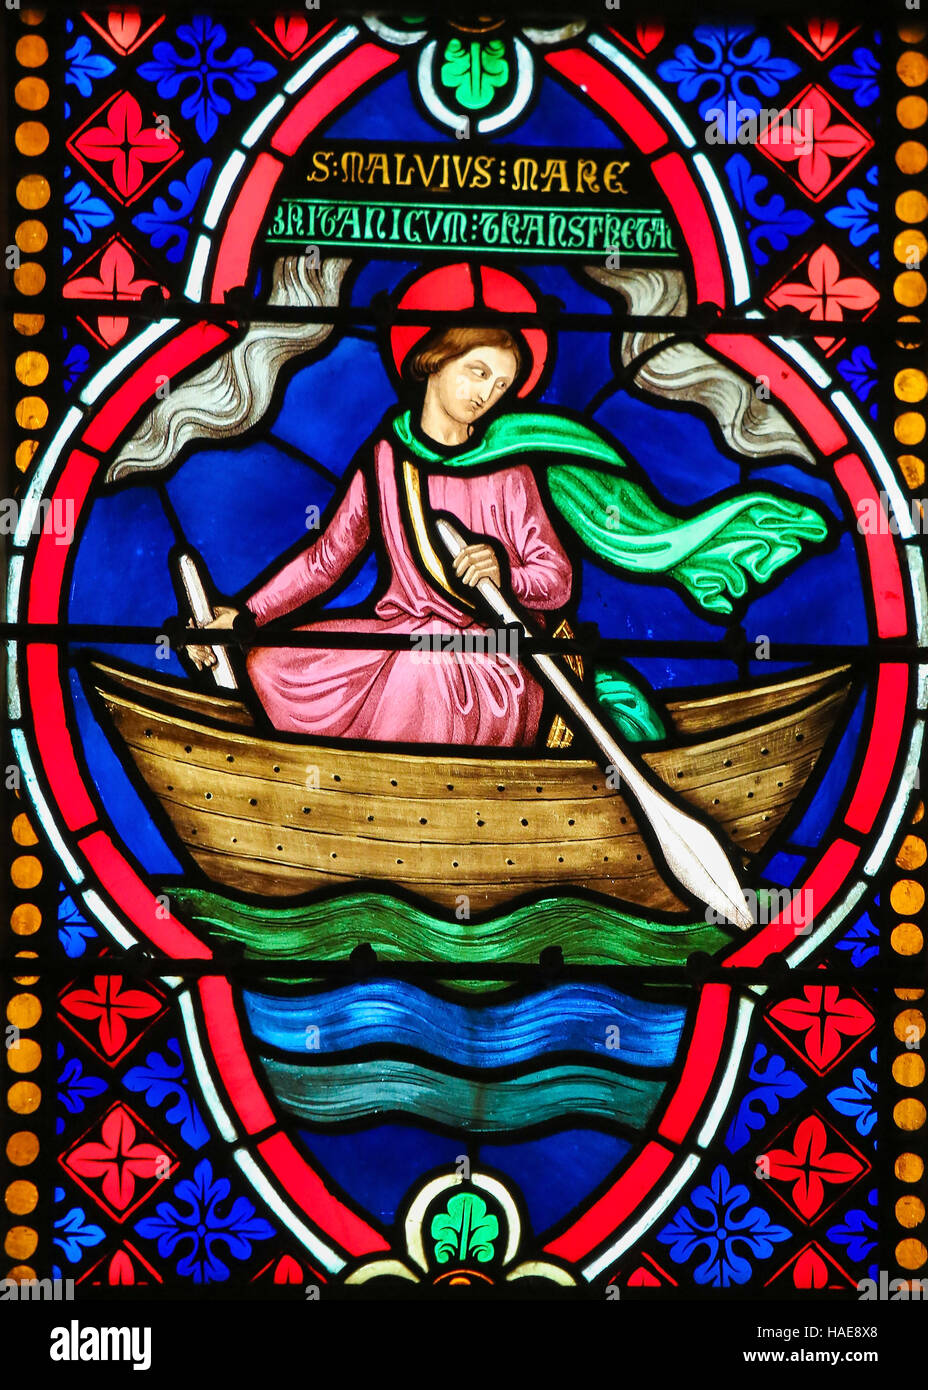 Stained Glass window in the Cathedral of Bayeux, France, depicting Saint Manveus or Manvieu, 5th century bishop of Bayeux, in a boat rowing to England Stock Photo